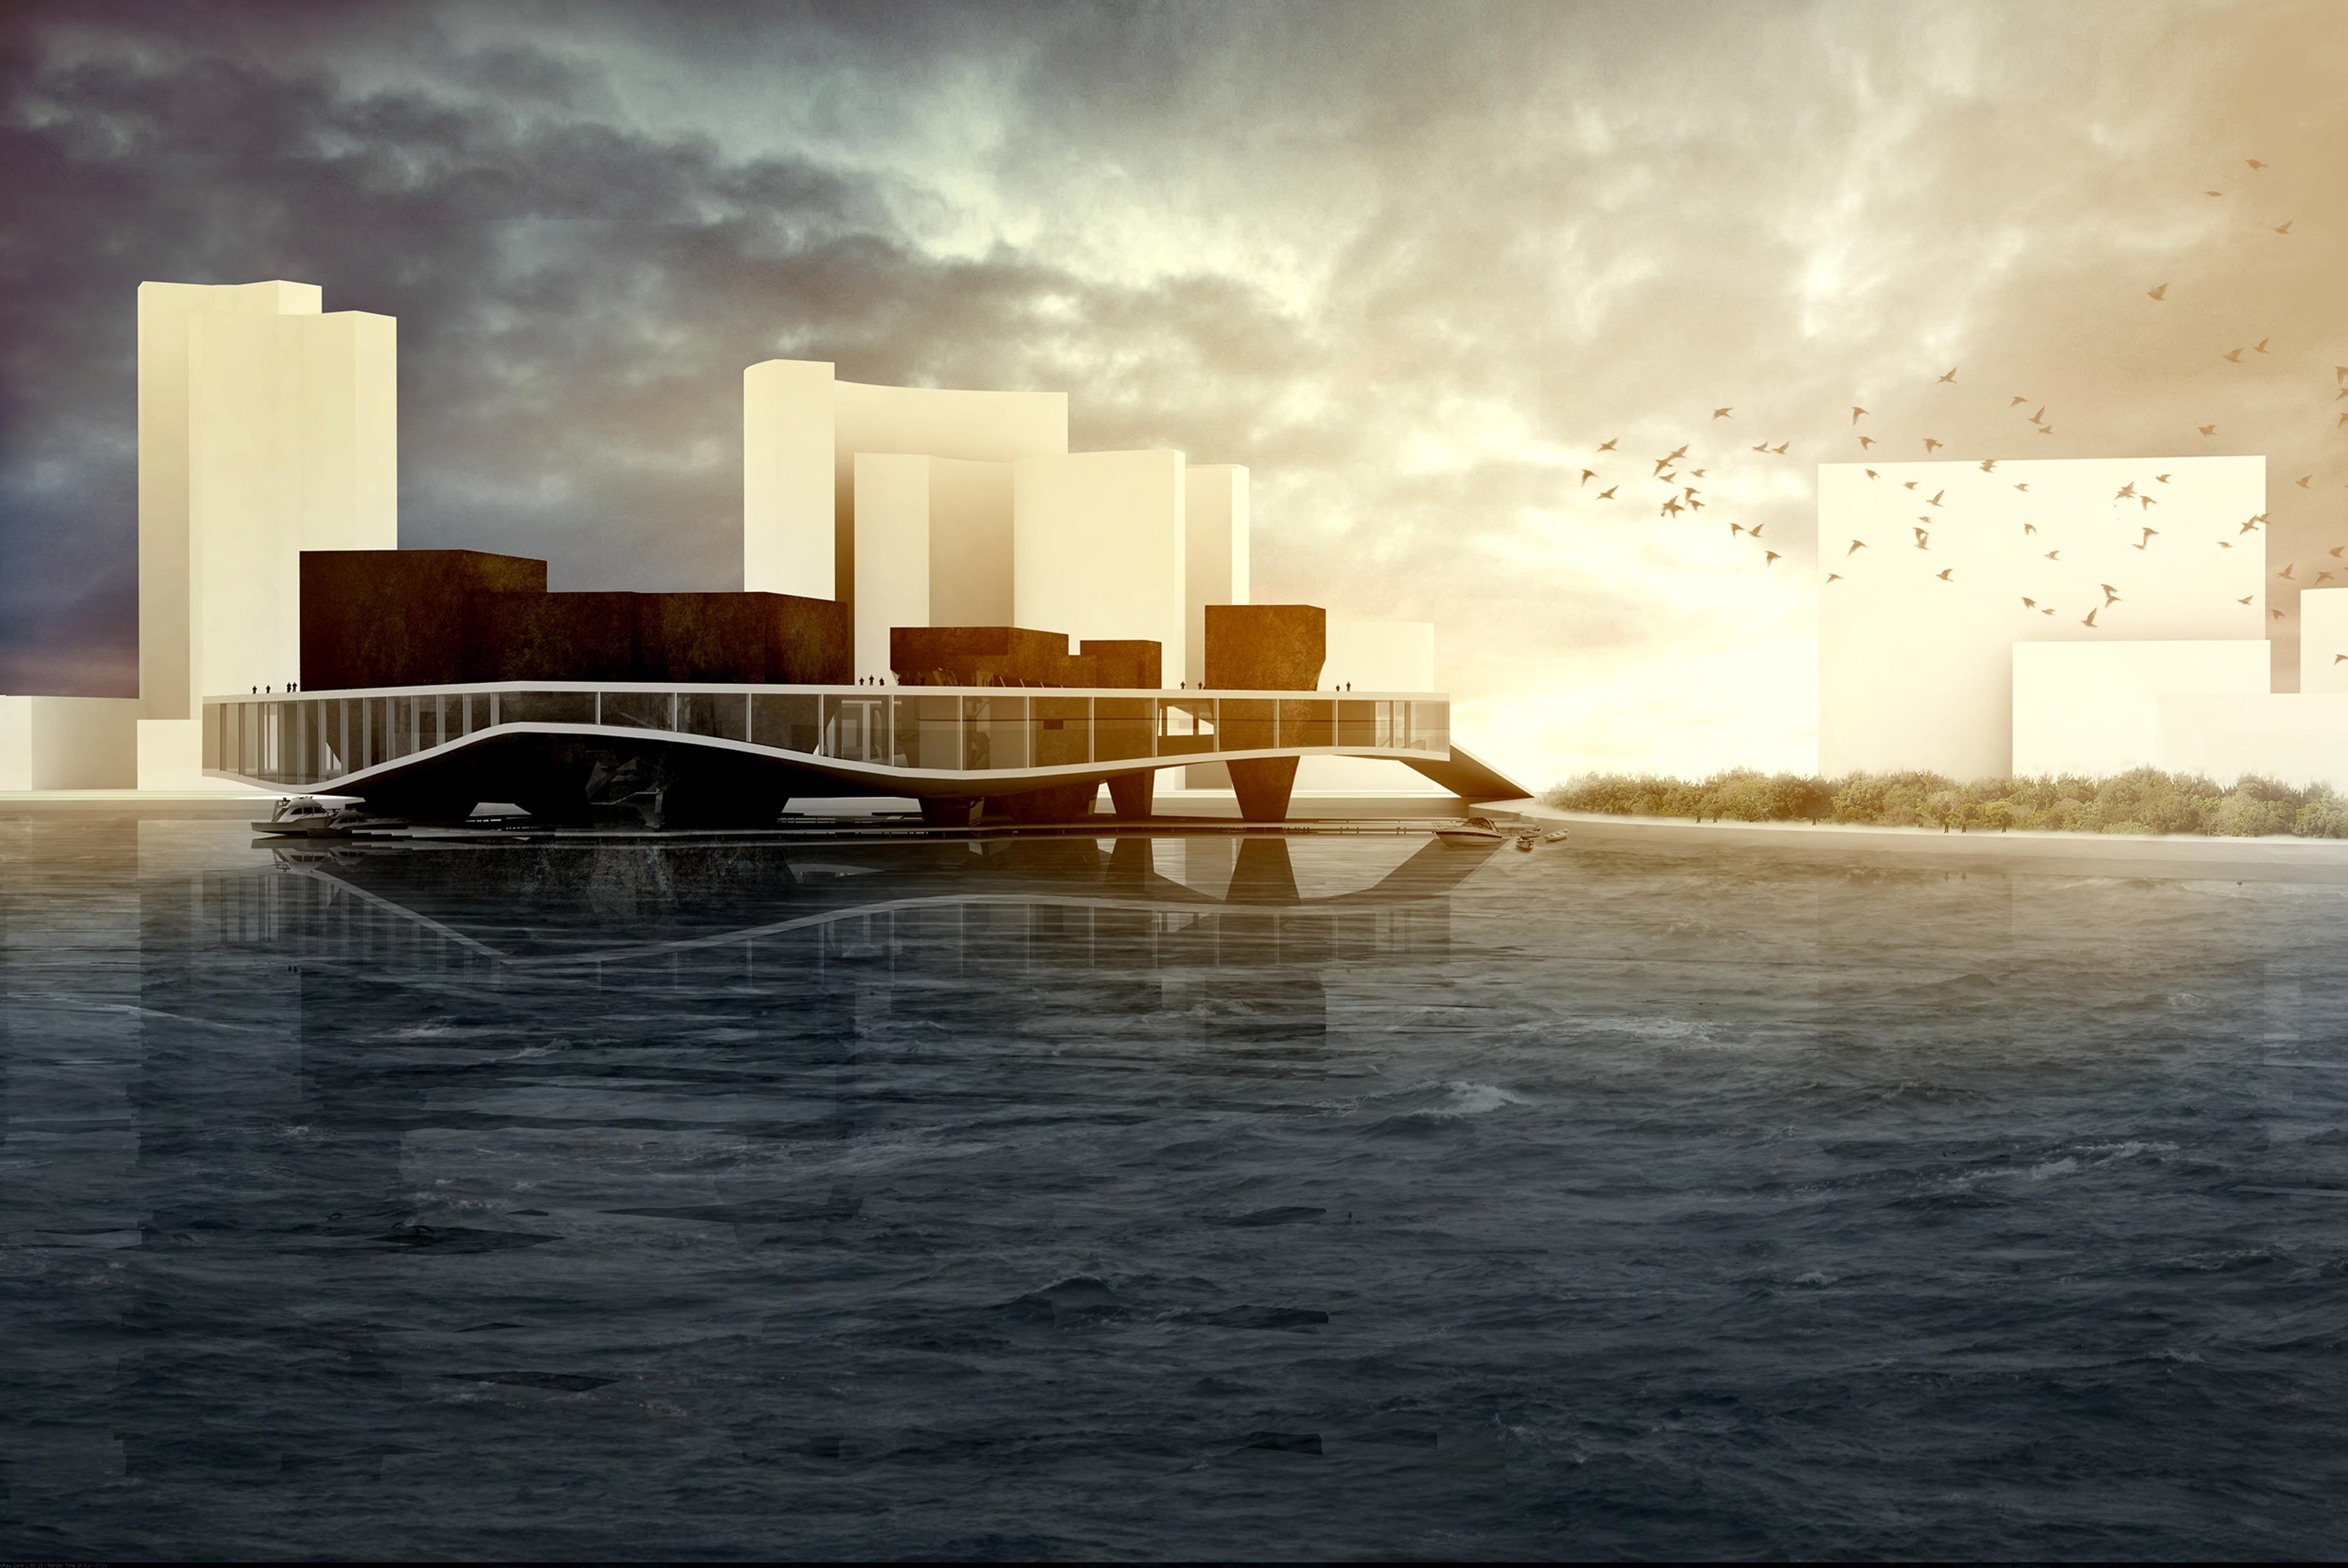 Architectural rendering of a opera house structure on the waterfront